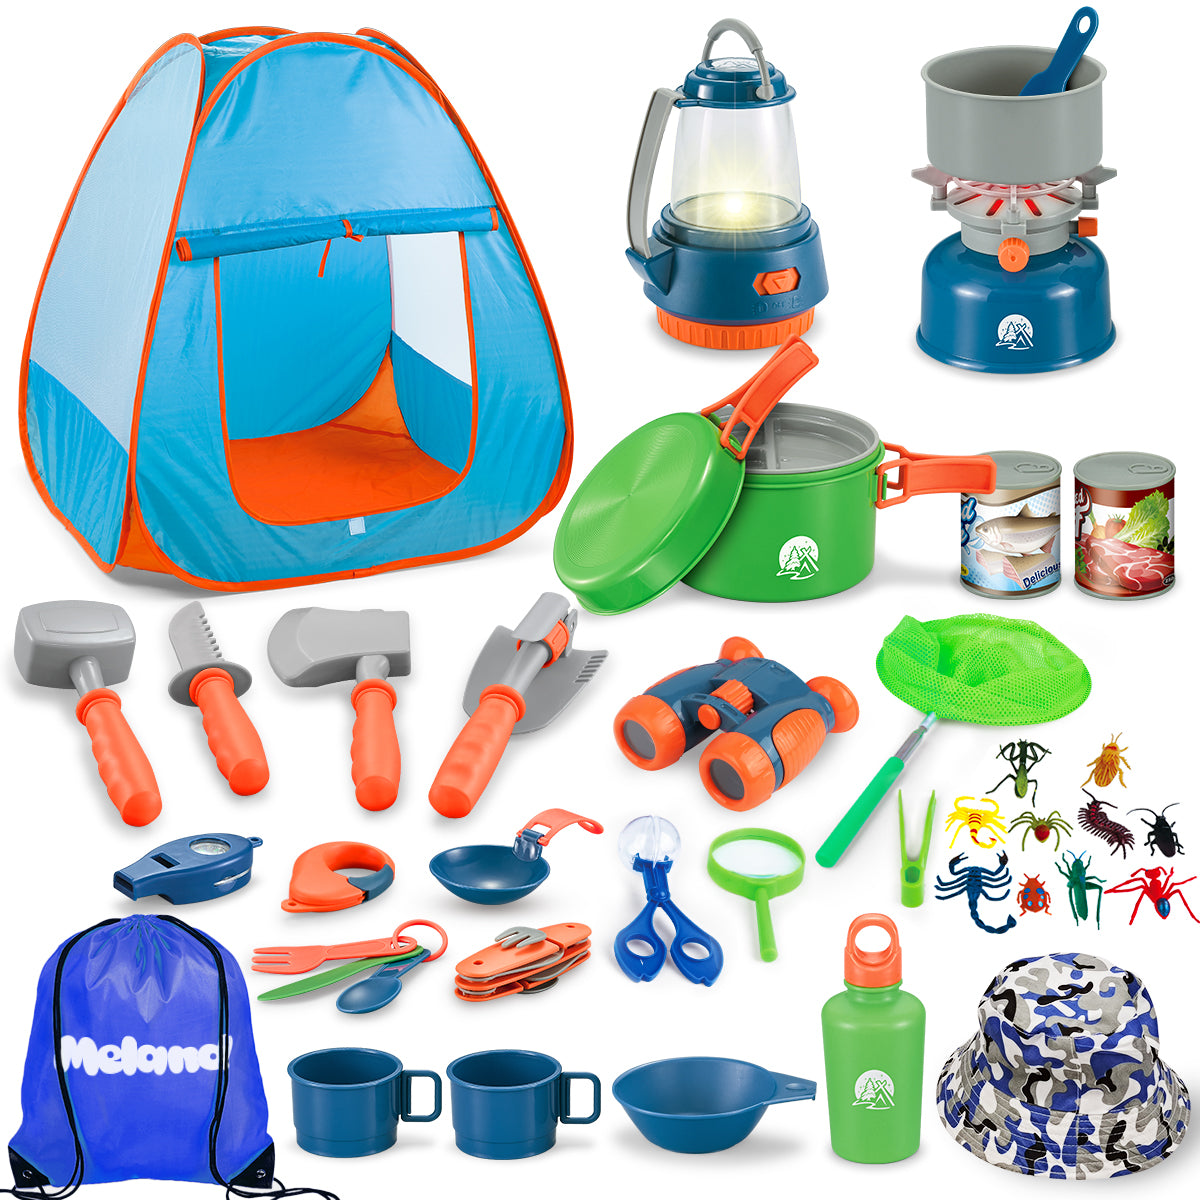 Buy Kids Outdoor Gear & Camping Set with Tent